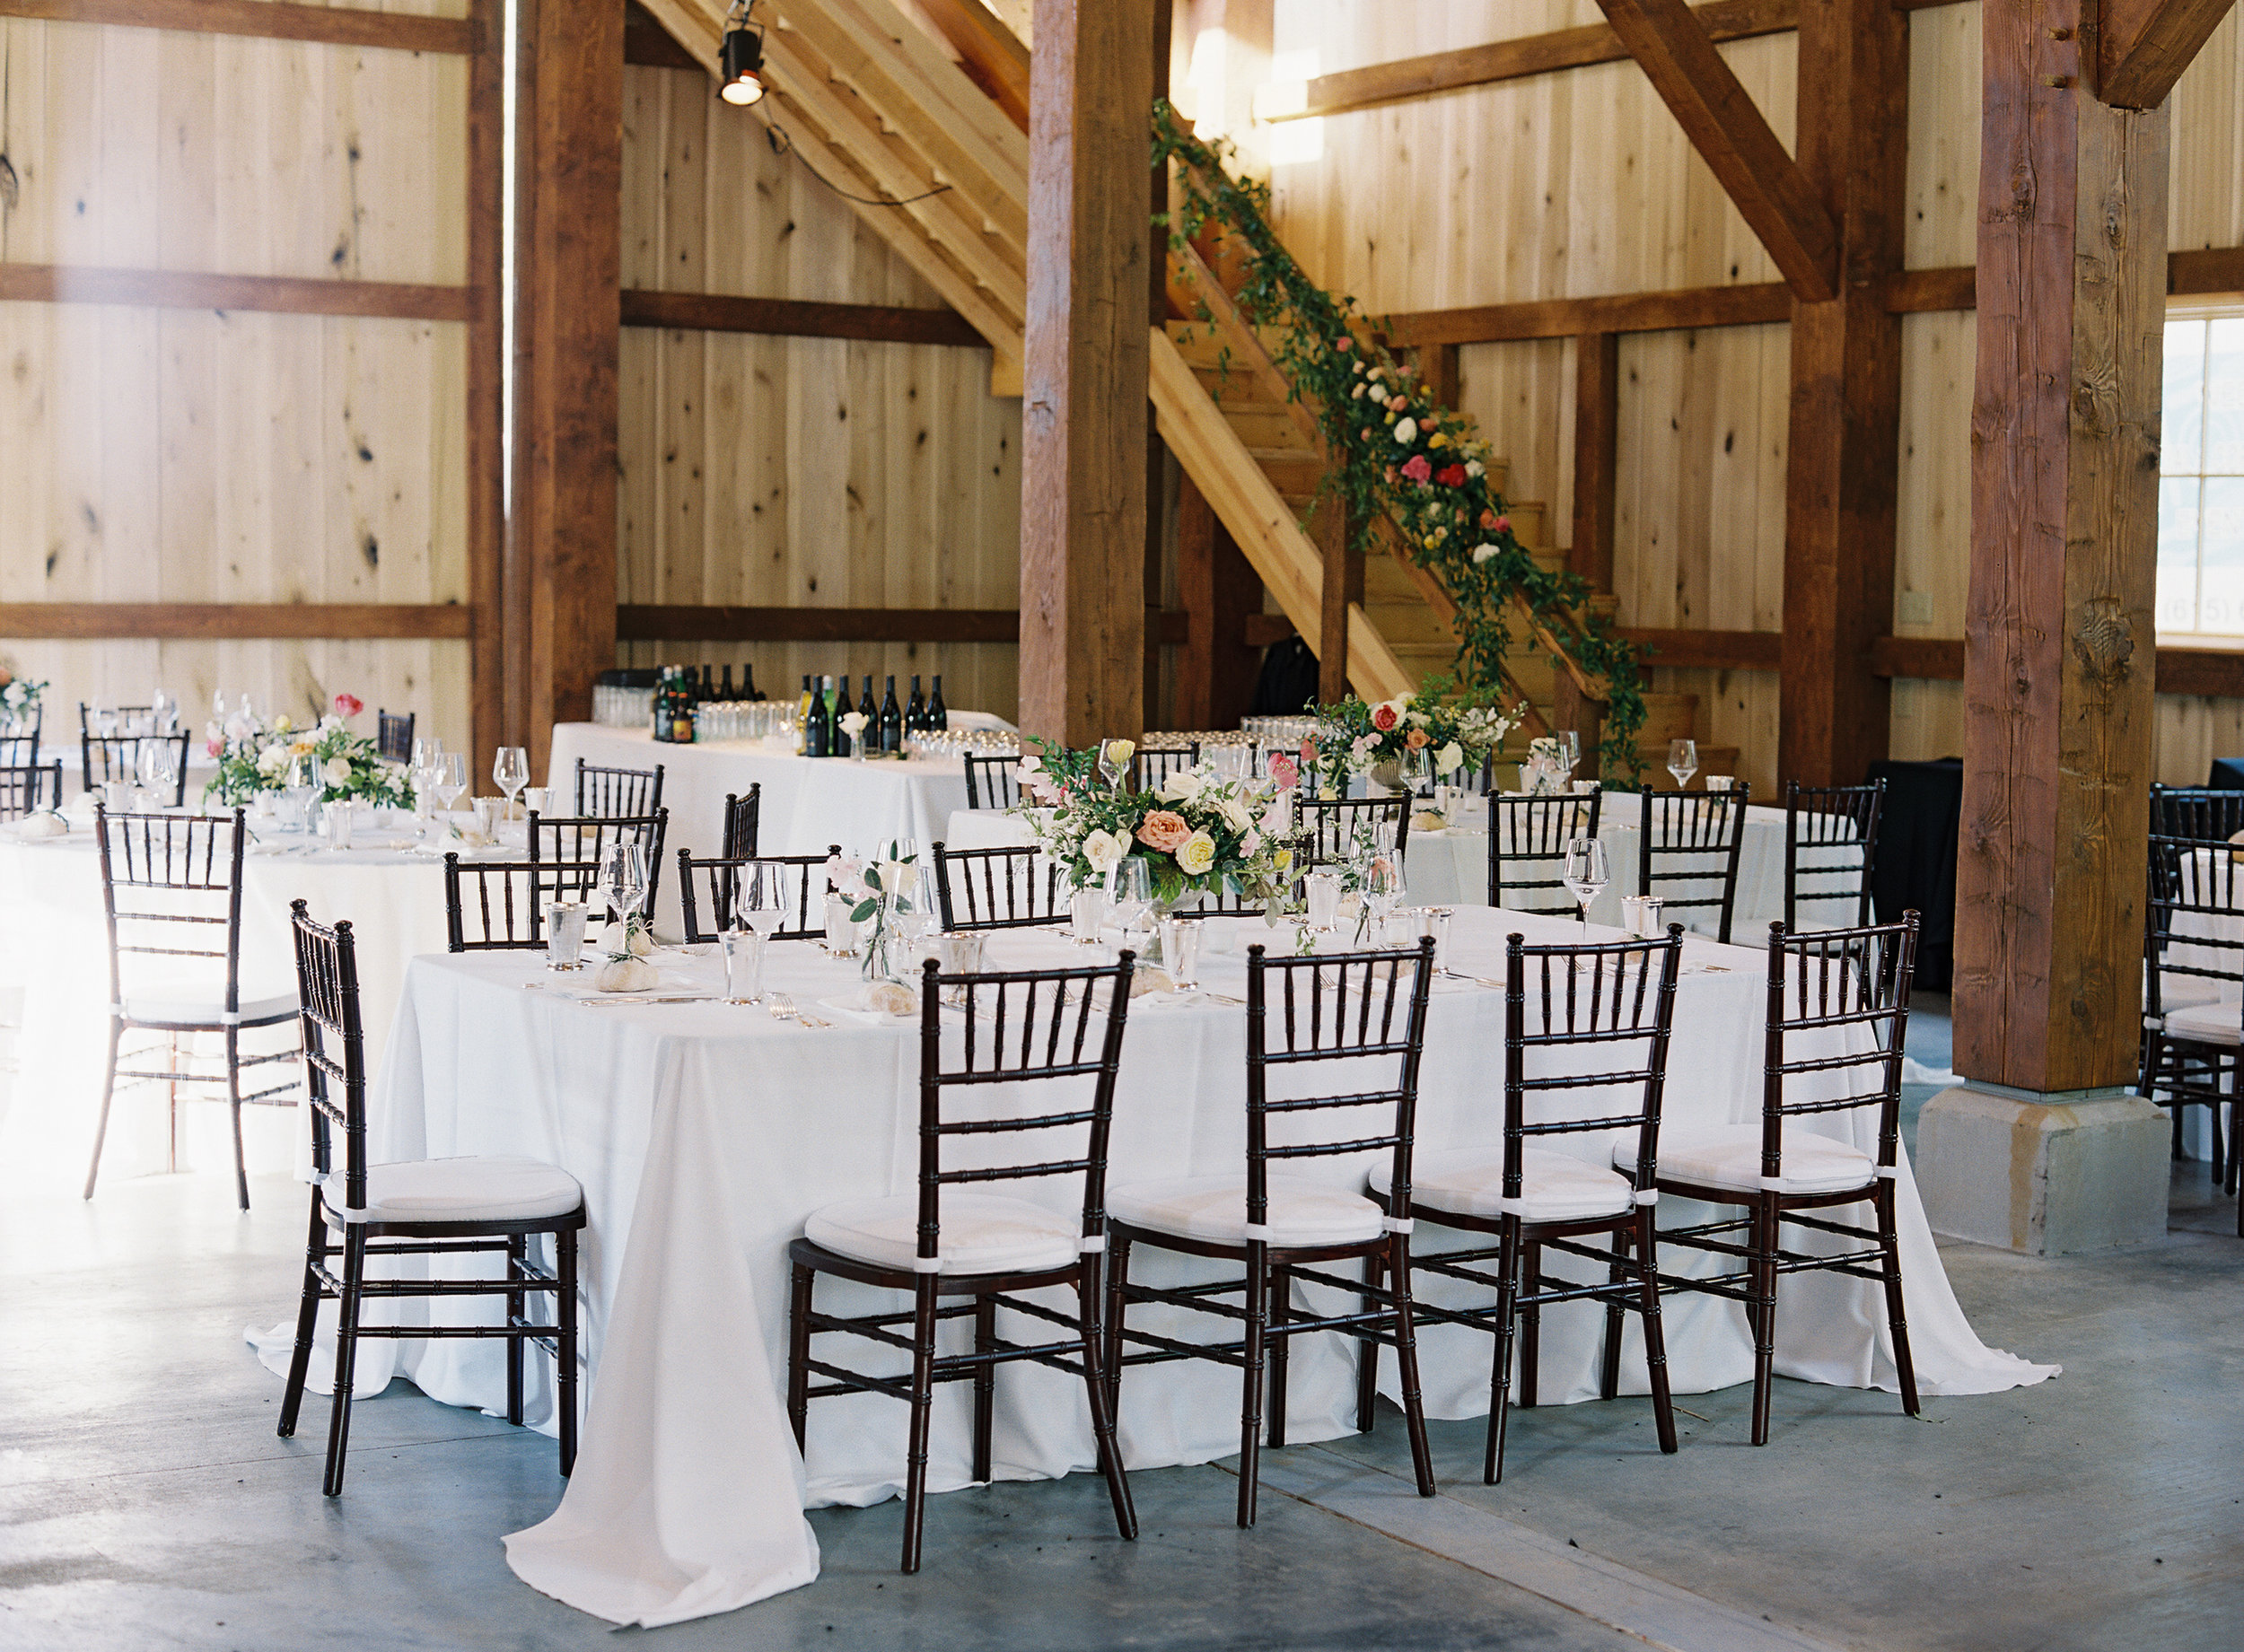 Upscale barn wedding with Silver compote centerpieces with natural greenery, peach garden roses, pink tulips, and spirea // Nashville Wedding Floral Design